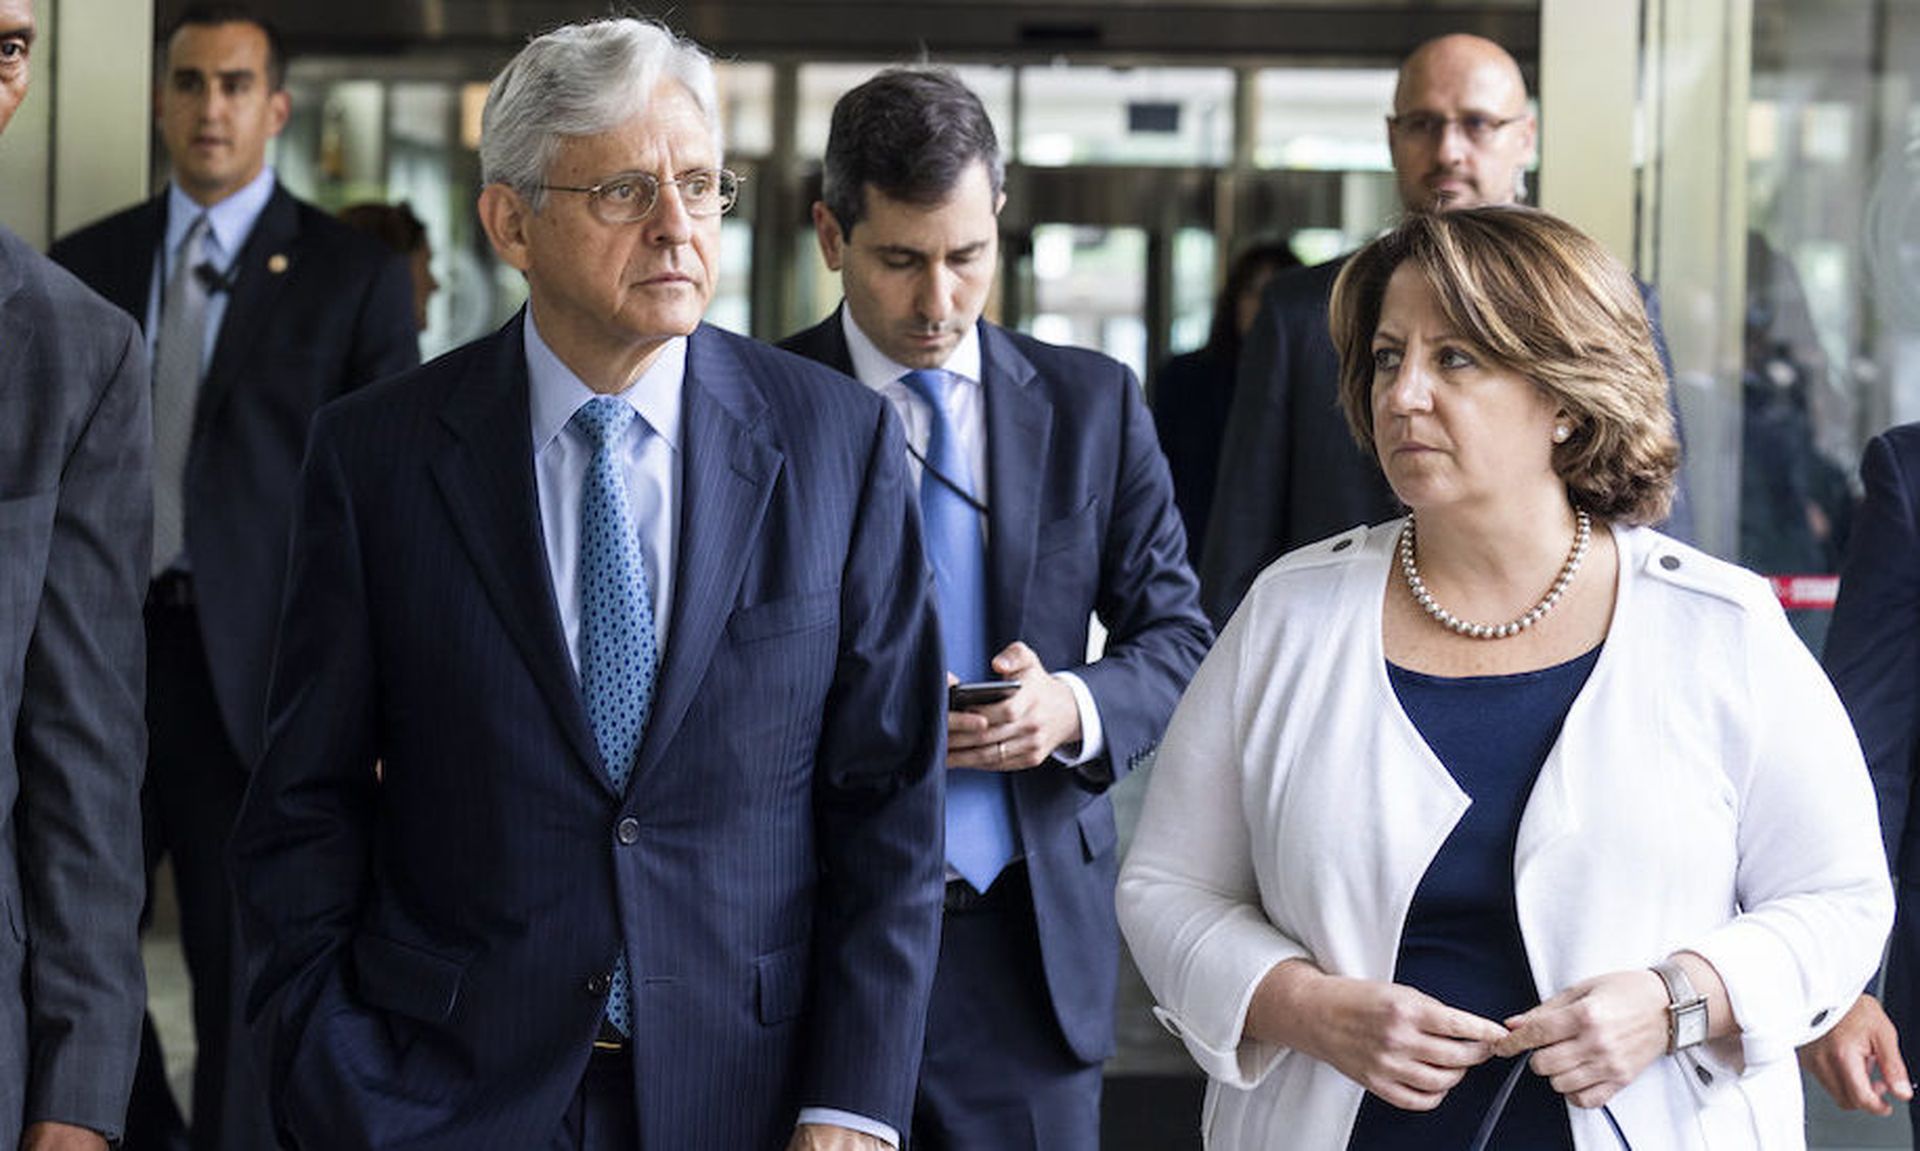 Attorney General Merrick Garland, center, along with Deputy Attorney General Lisa Monaco, right, in Washington. Monaco announced two new efforts focused on cryptocurrency and contractor security. (Photo by Jim Lo Scalzo &#8211; Pool/Getty Images)